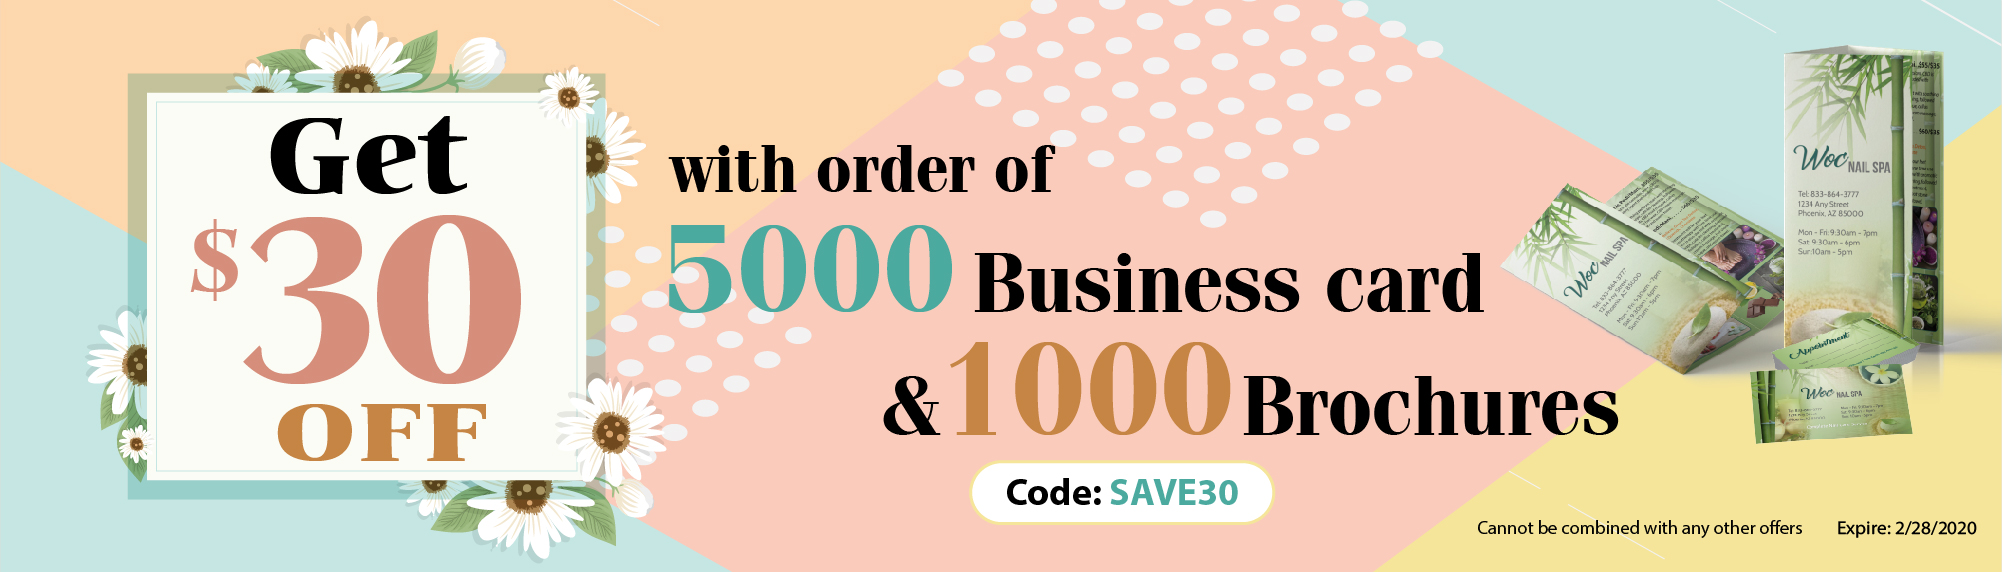 $30 OFF with order of 5000 Business card & 1000 Brochures